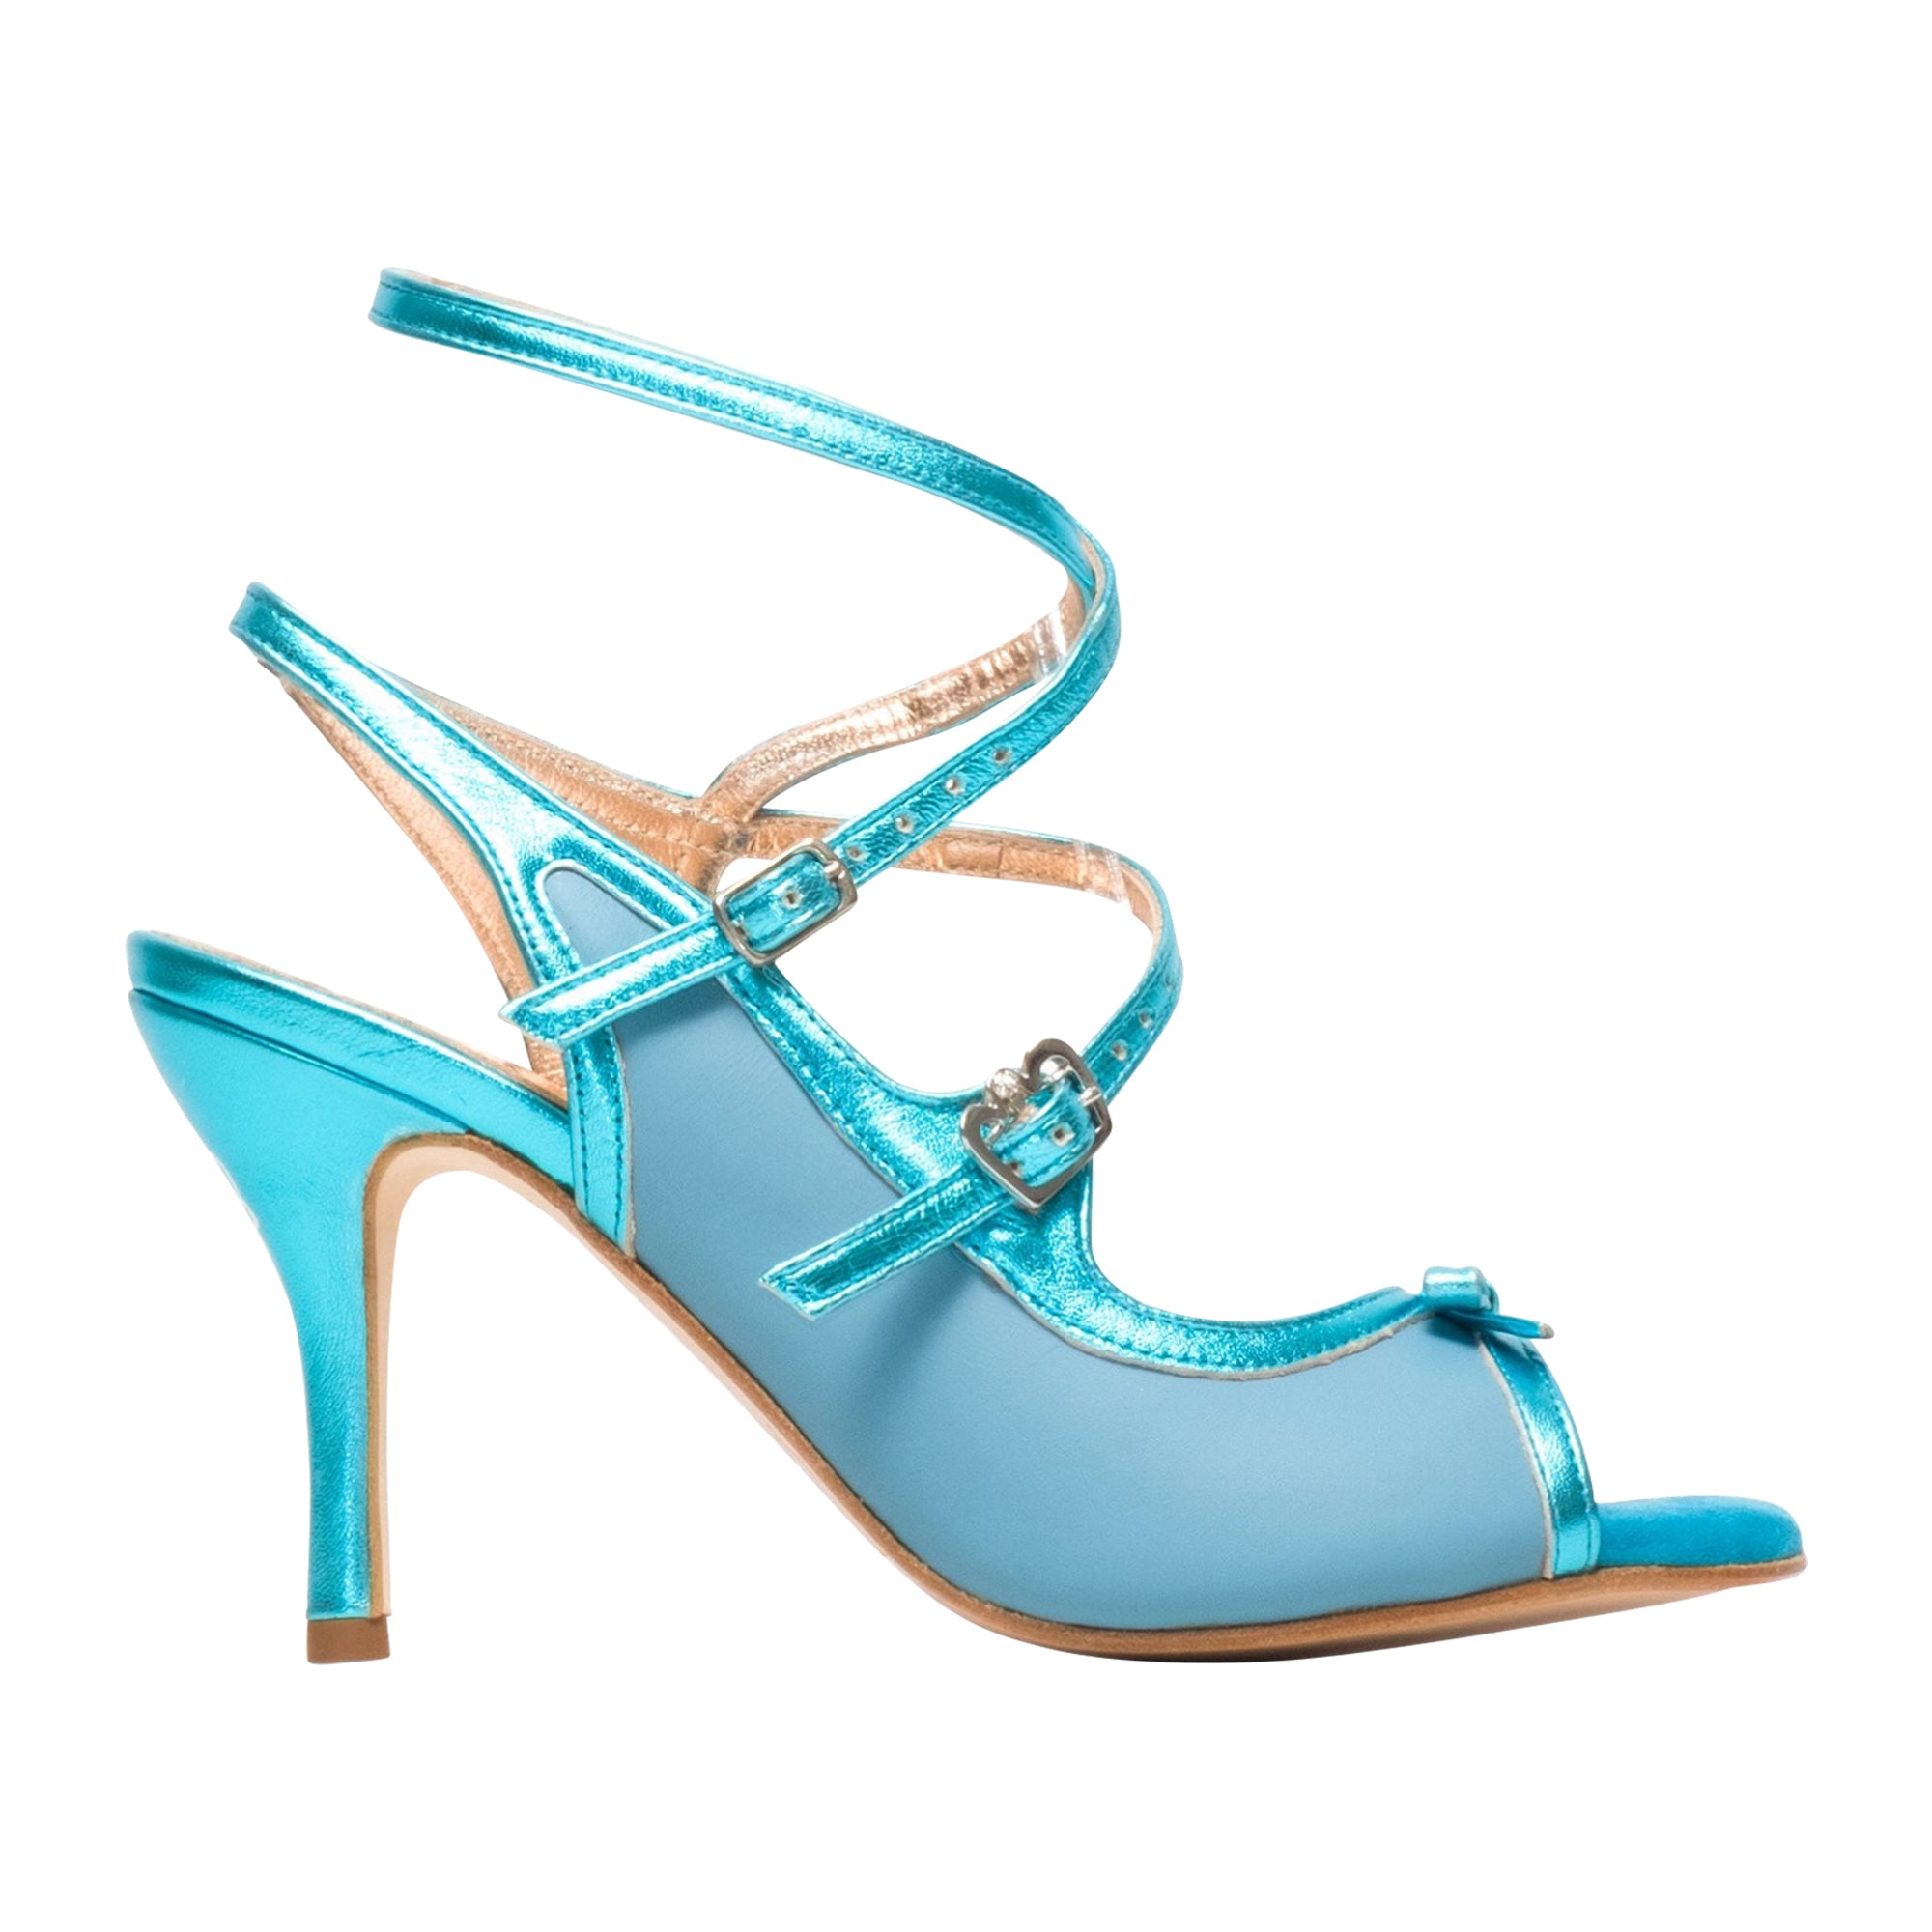 Size 9 - Pigalle in Turquoise Leather - Regina